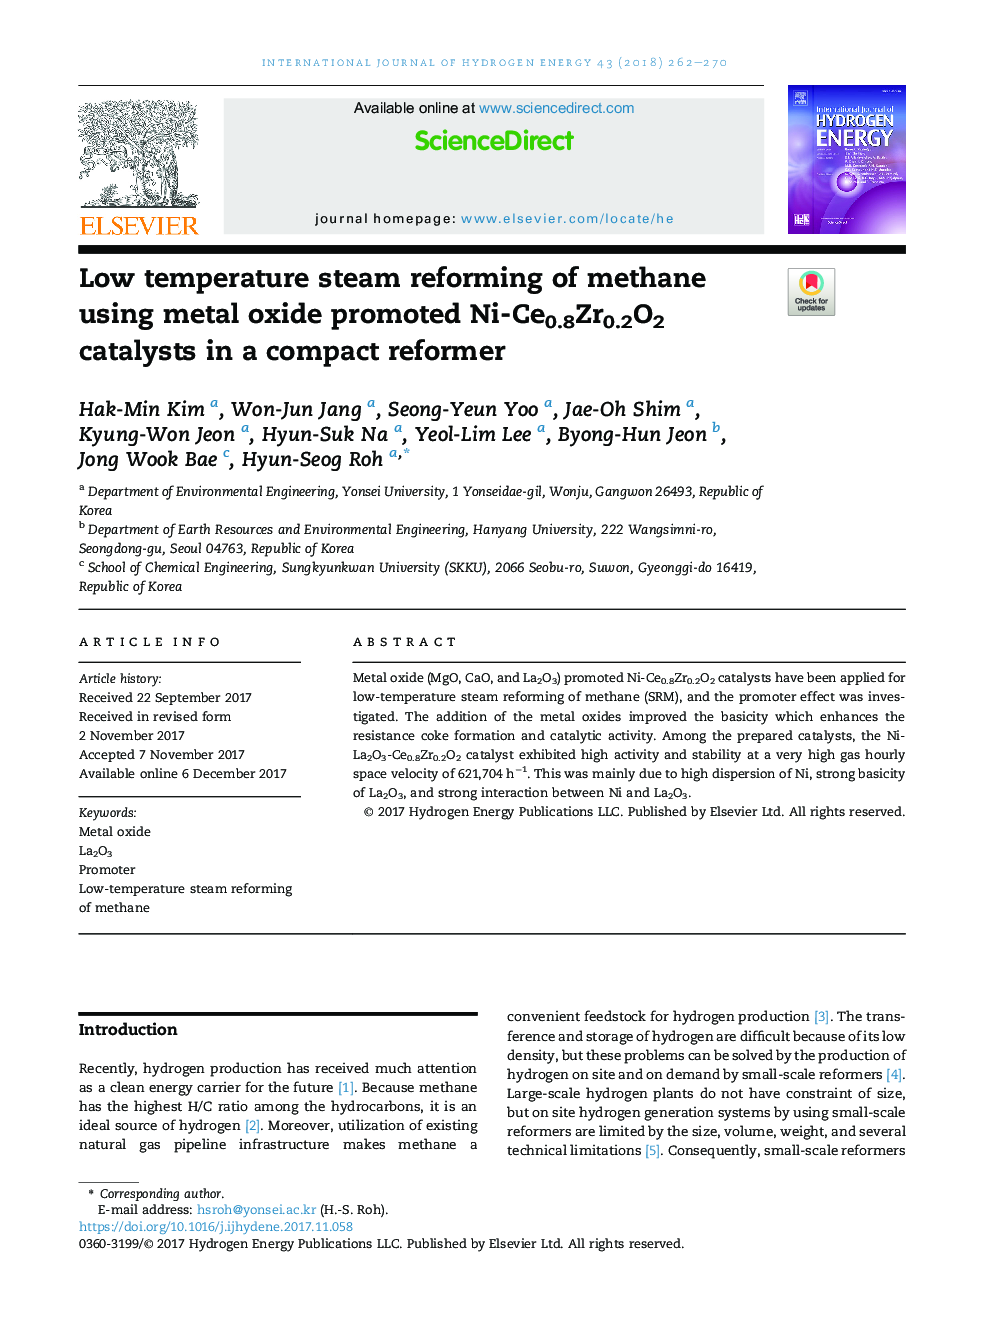 Low temperature steam reforming of methane using metal oxide promoted Ni-Ce0.8Zr0.2O2 catalysts in a compact reformer